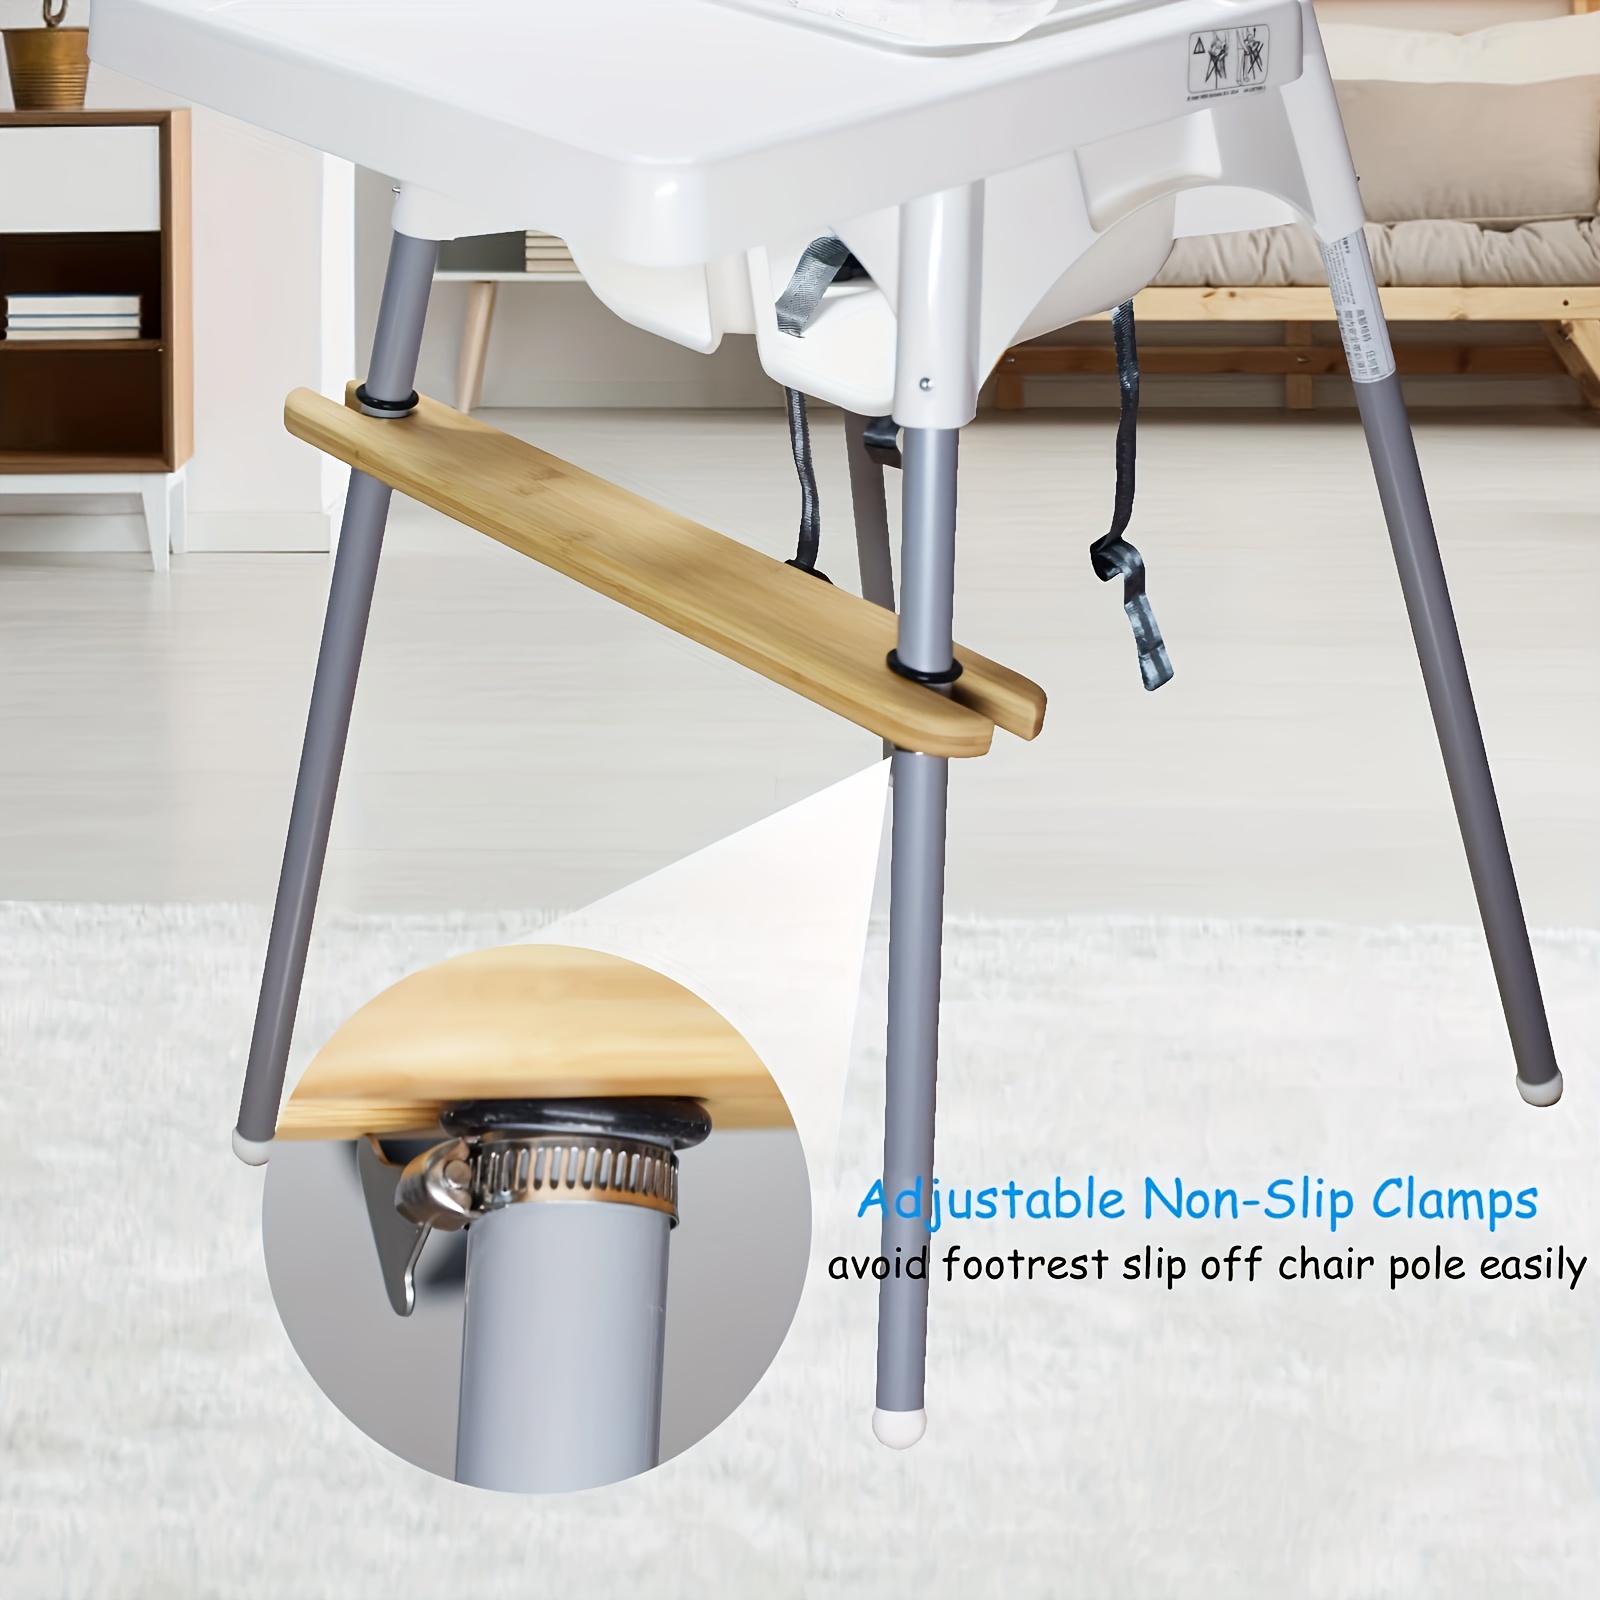 High Chair Footrest Compatible with IKEA Antilop - Bamboo Wooden Footrest  for IKEA Antilop High Chair Accessories (Bamboo)